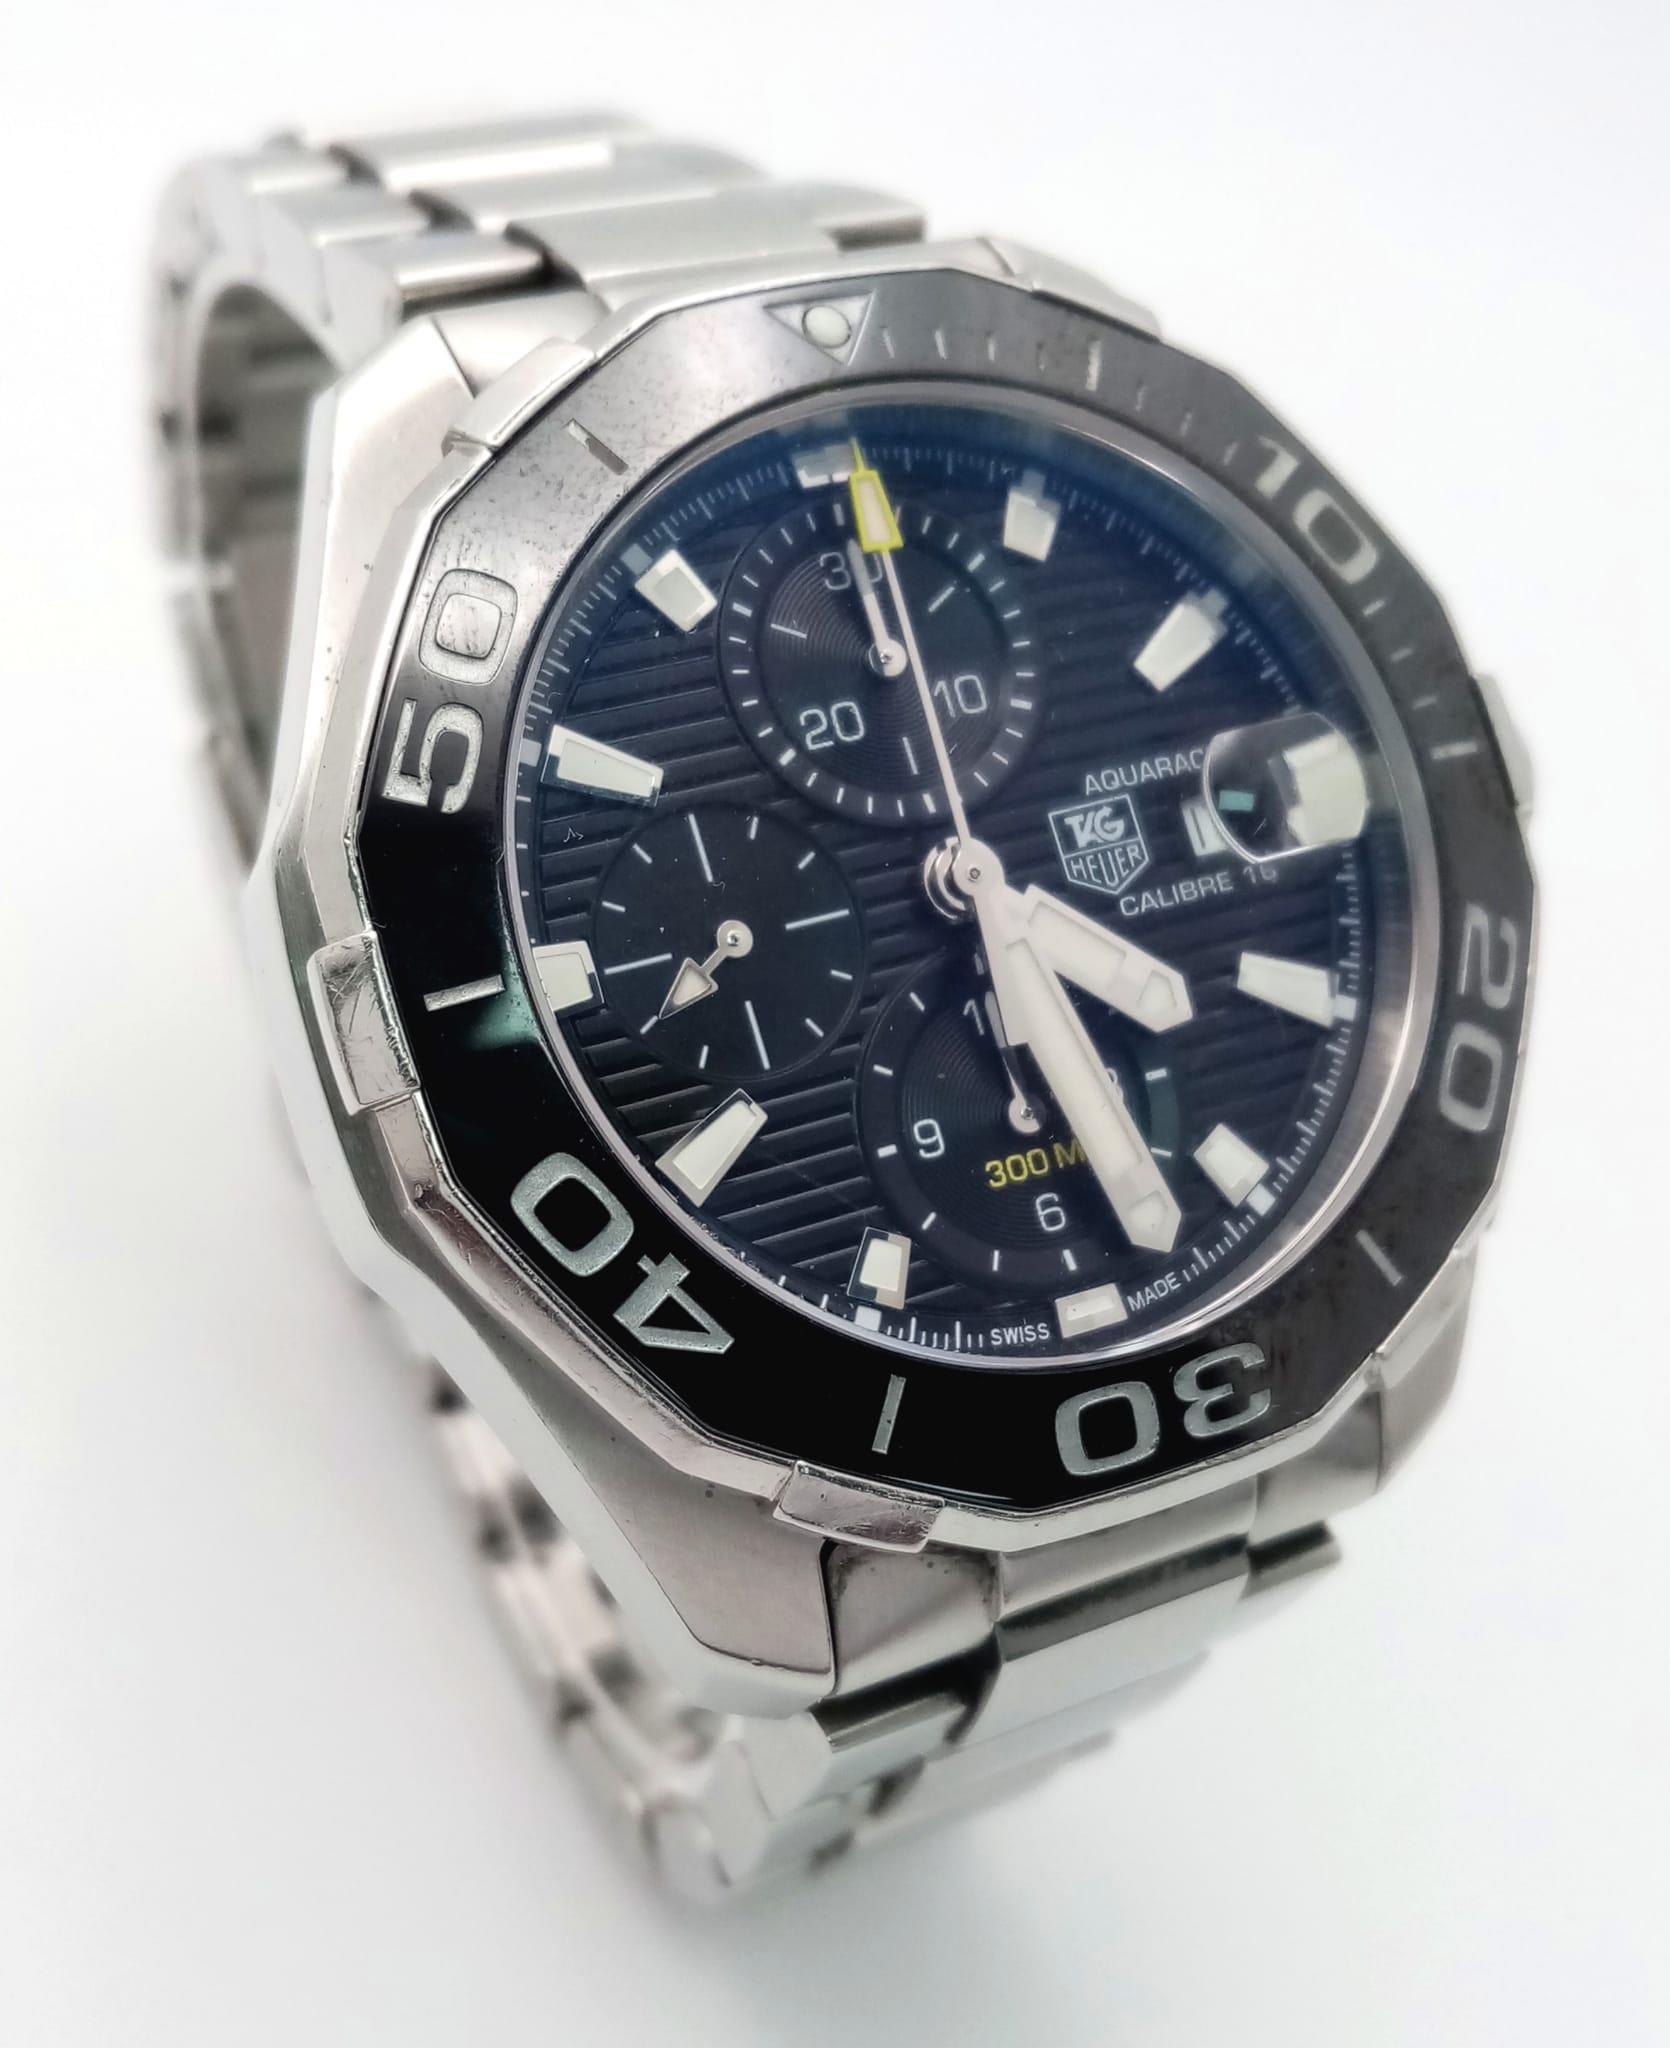 A Tag Heuer Automatic Aquaracer Gents Watch. Stainless steel bracelet and case - 44mm. Black dial - Image 3 of 8